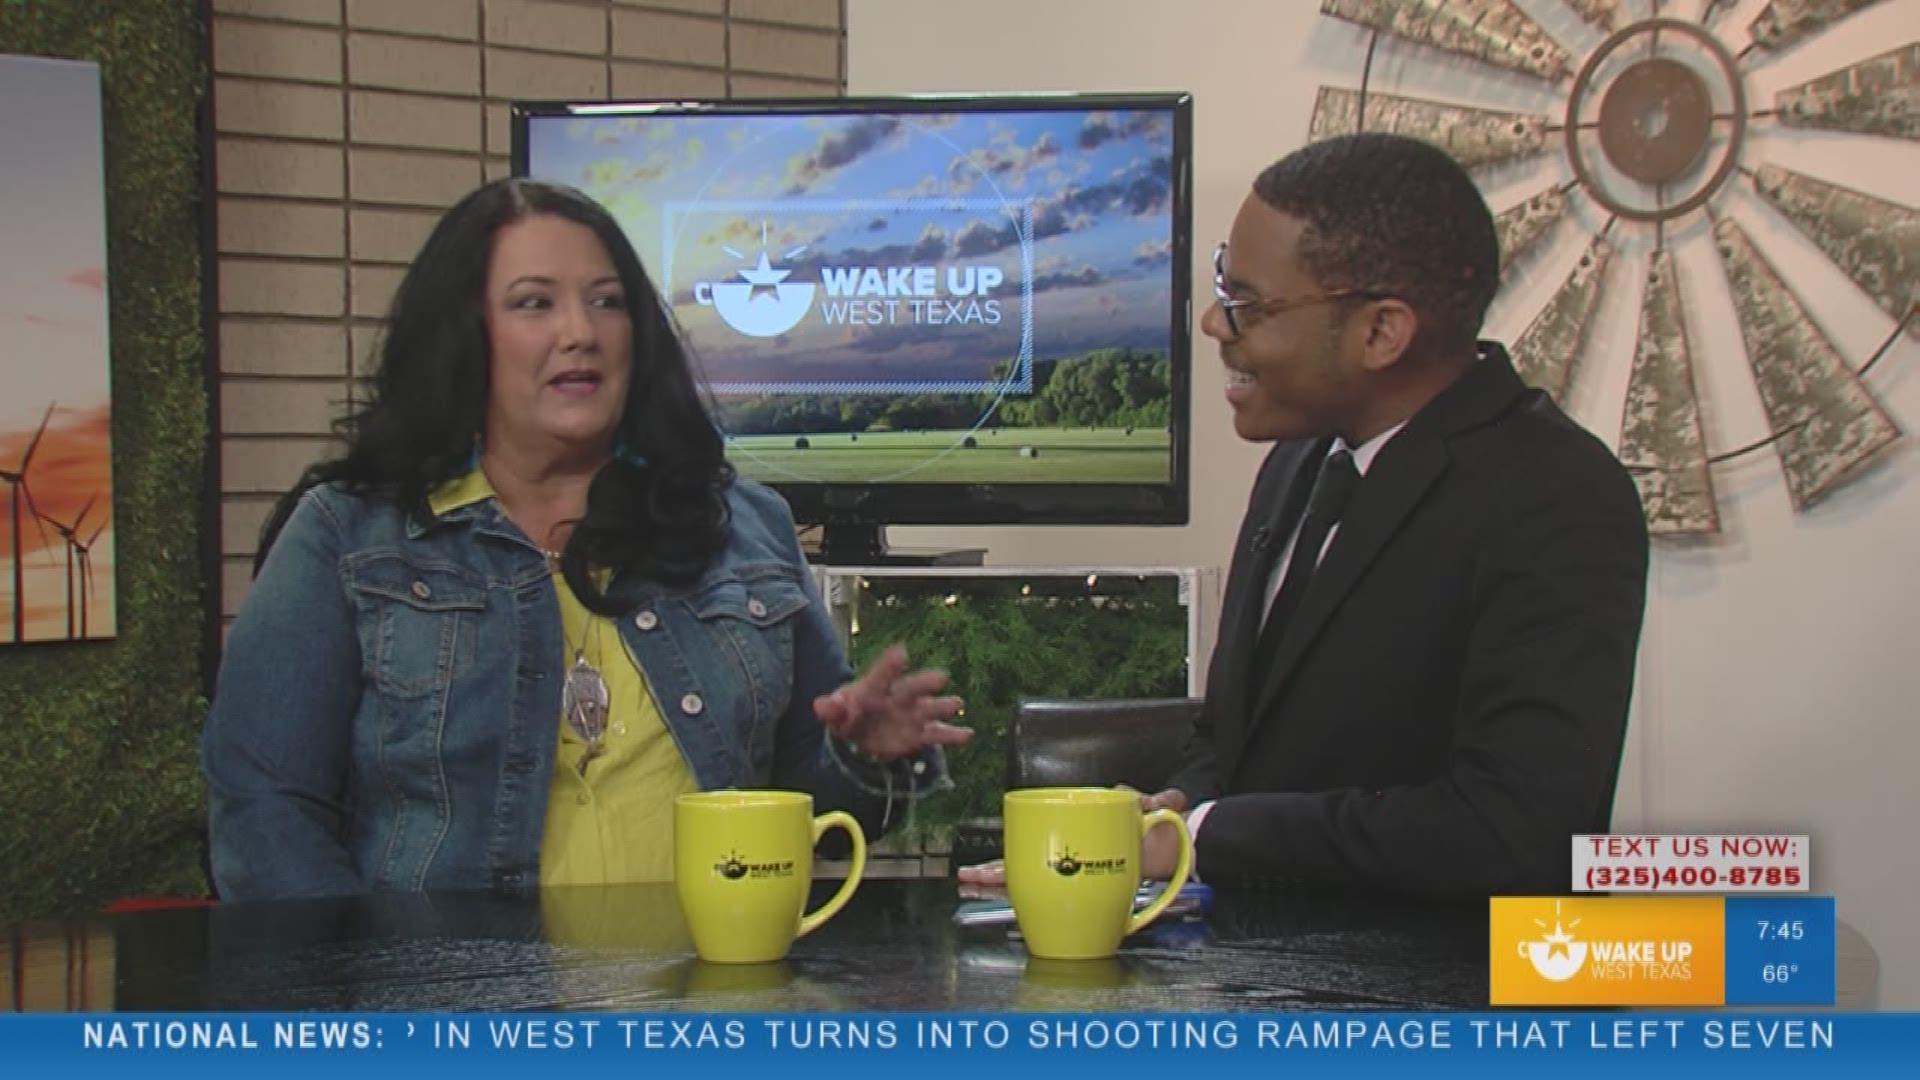 Our Malik Mingo spoke with Kellye Duncan of the San Angelo Republican Women about the September 7 meeting at the West Texas Rehab Conference Center from 6 p.m.- 7:30 p.m.